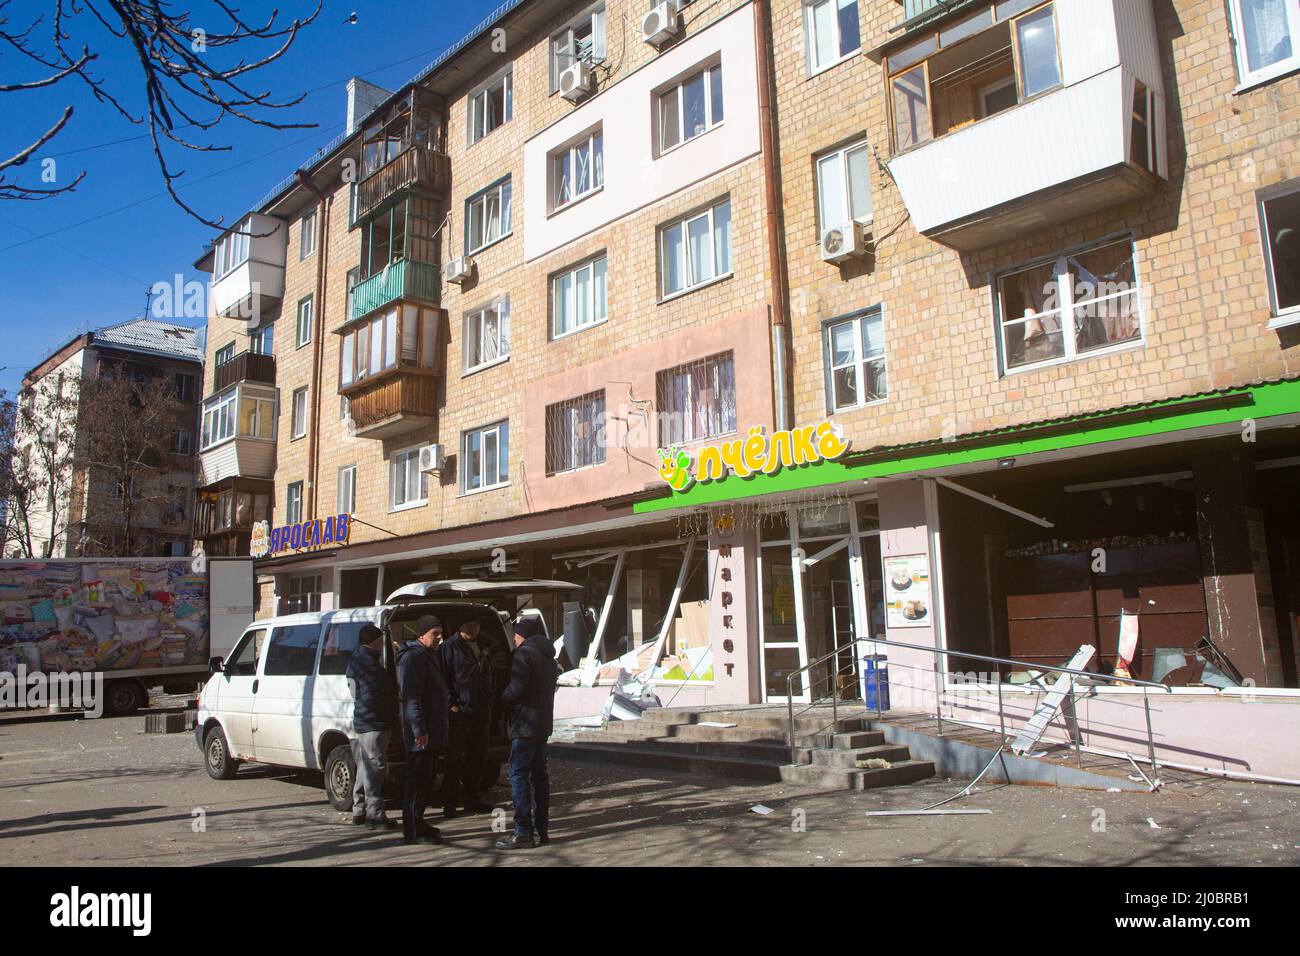 Local convenience store Pchyolka (Little Bee) at Vitriani Gory (Windy Hills) district in Kiev crushed by the Russian missile blast hundreds m away. Stock Photo